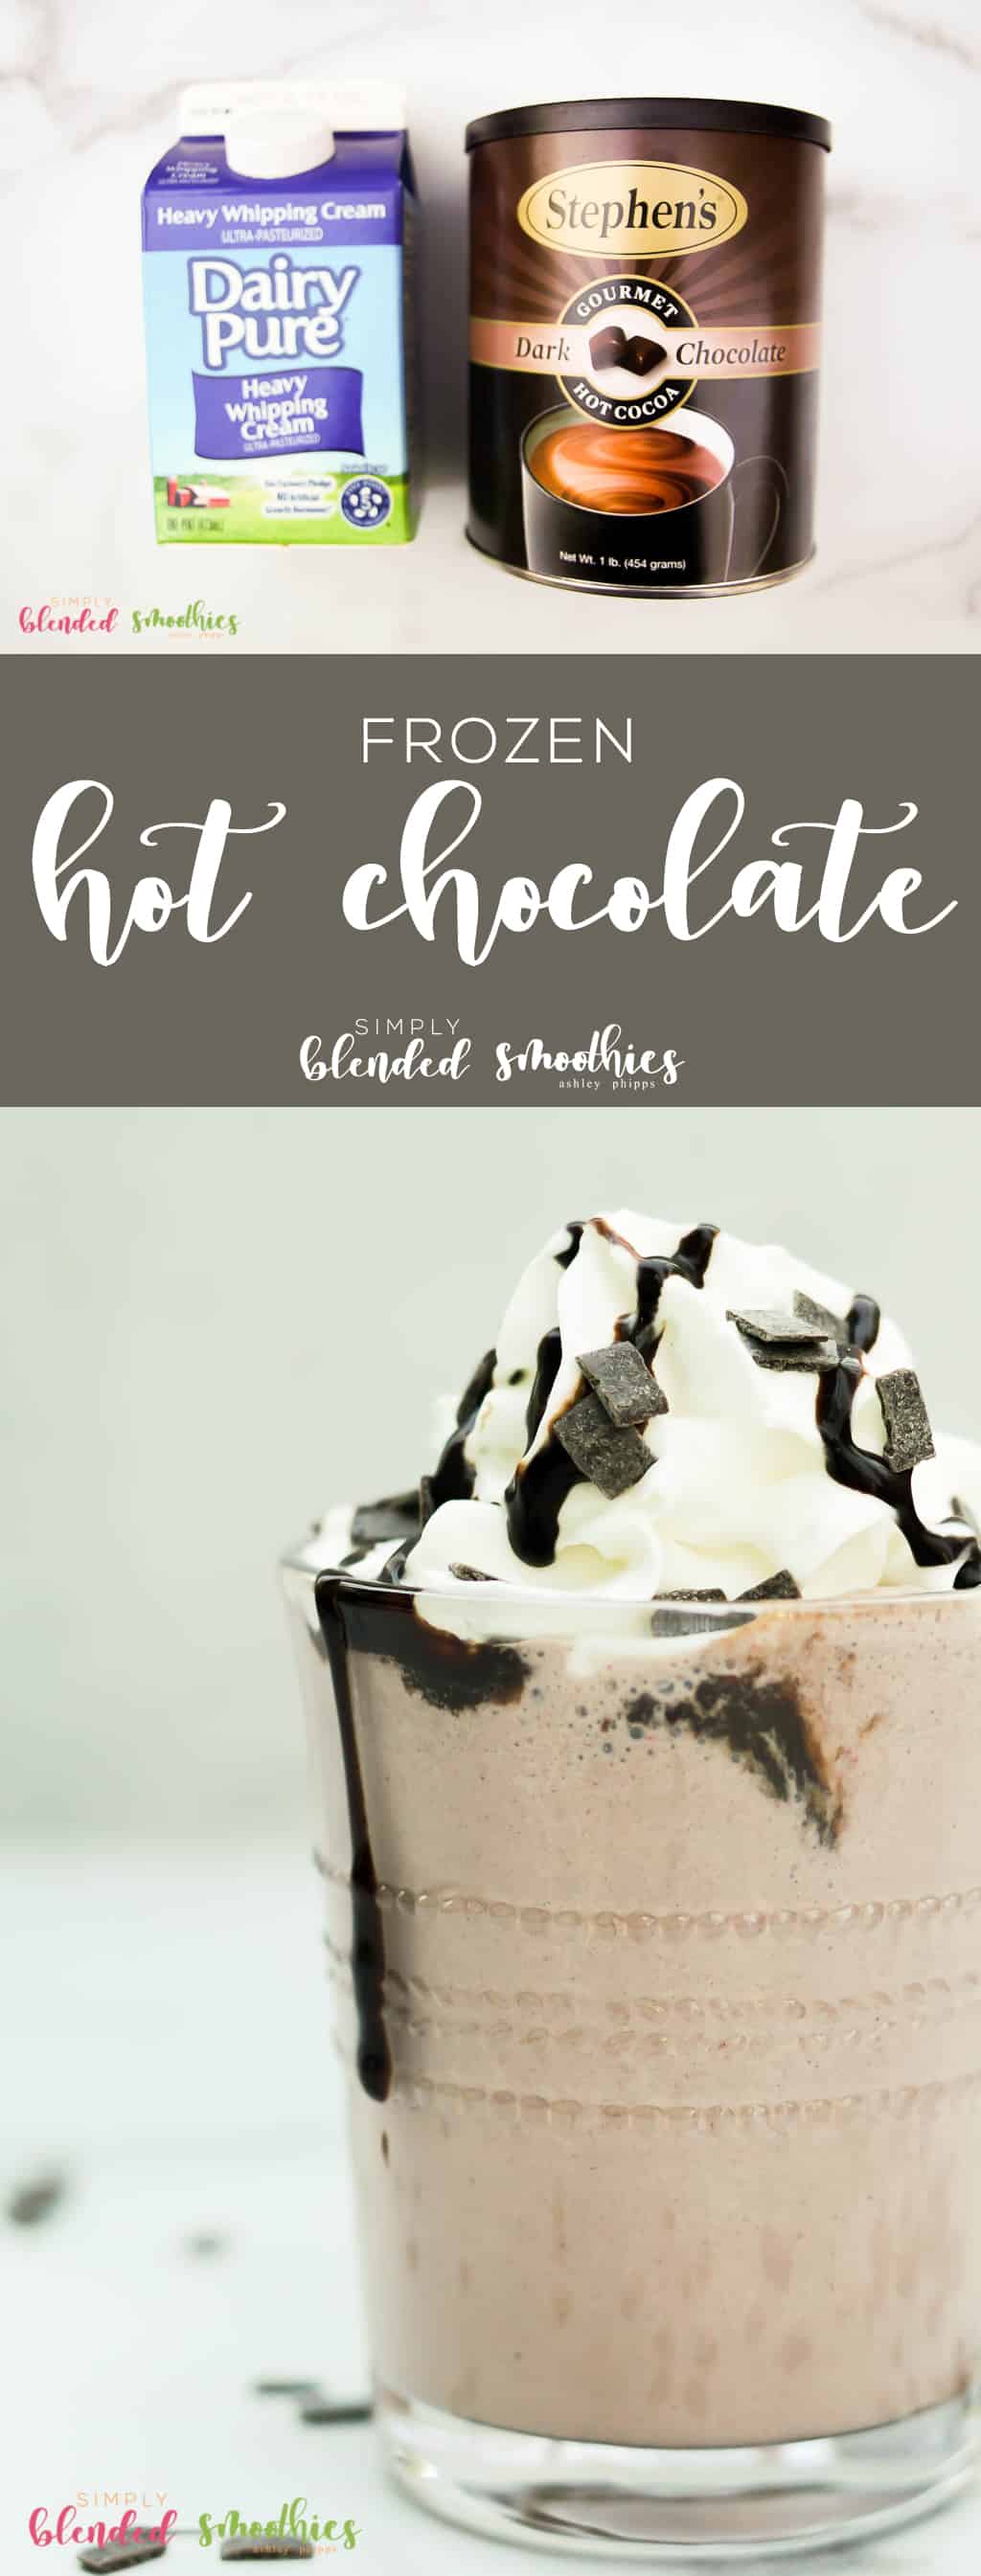 This Easy Frozen Hot Chocolate Recipe Is So Delicious And Easy To Make. It Is Rich, Creamy And Only Requires 3-Ingredients To Make!